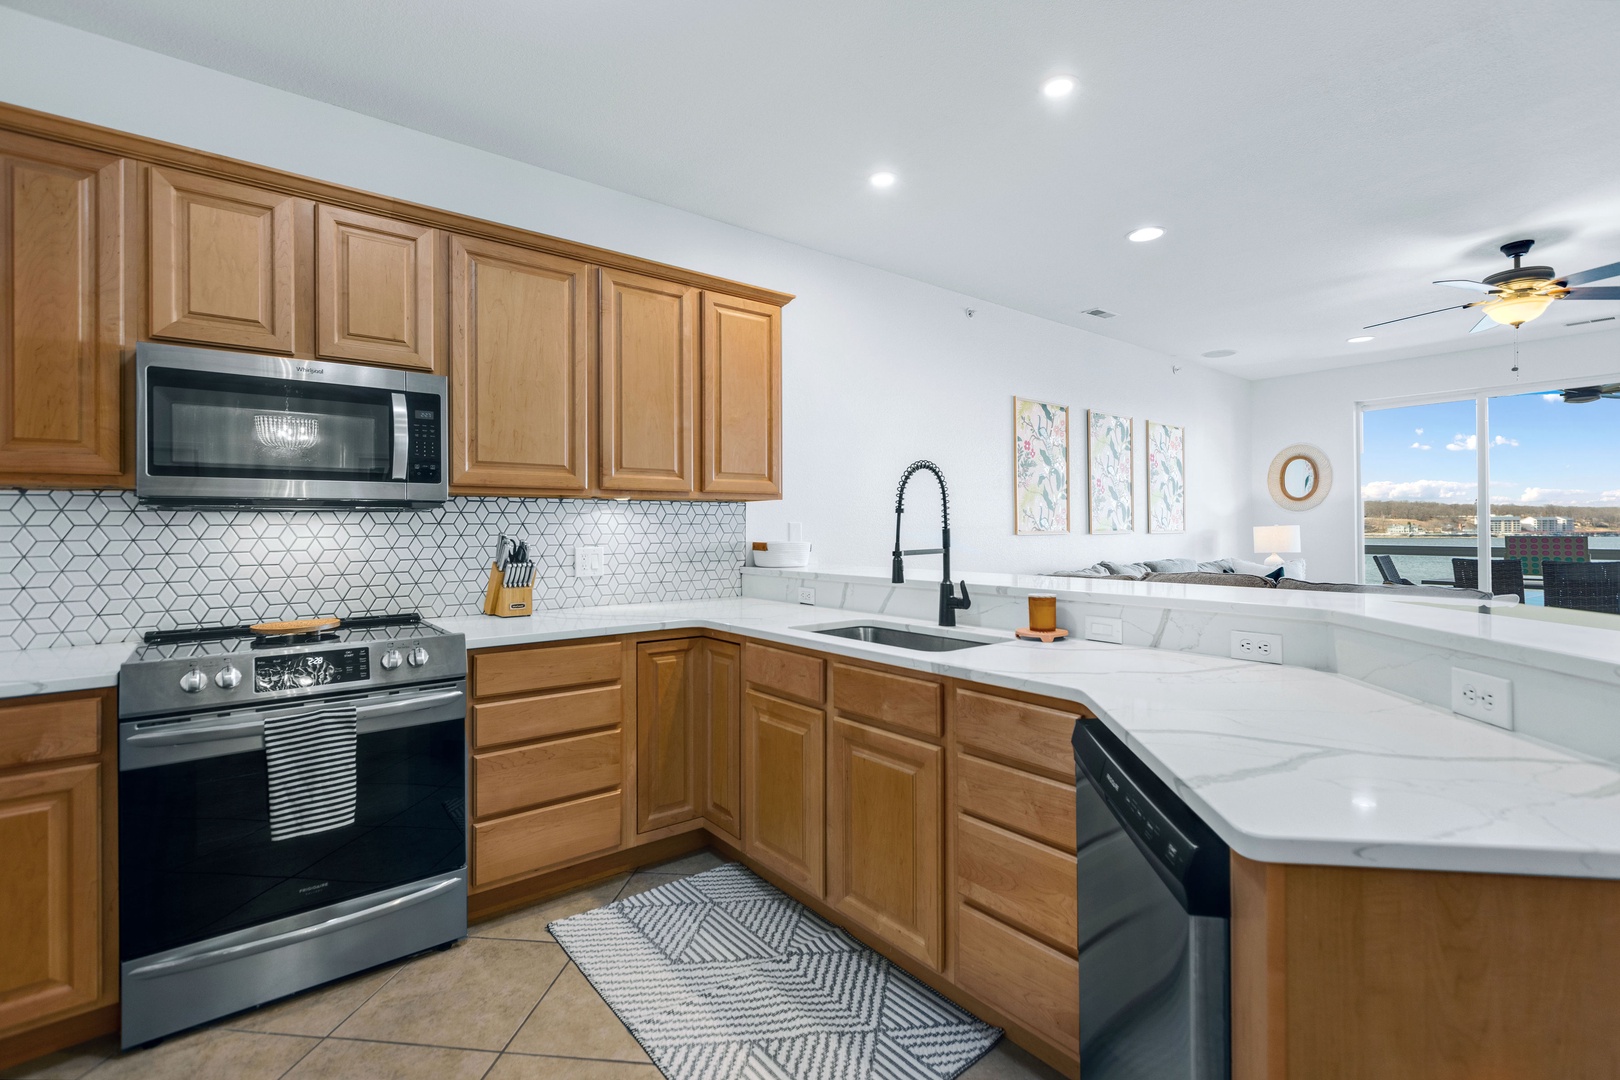 This kitchen offers ample space and all the comforts of home